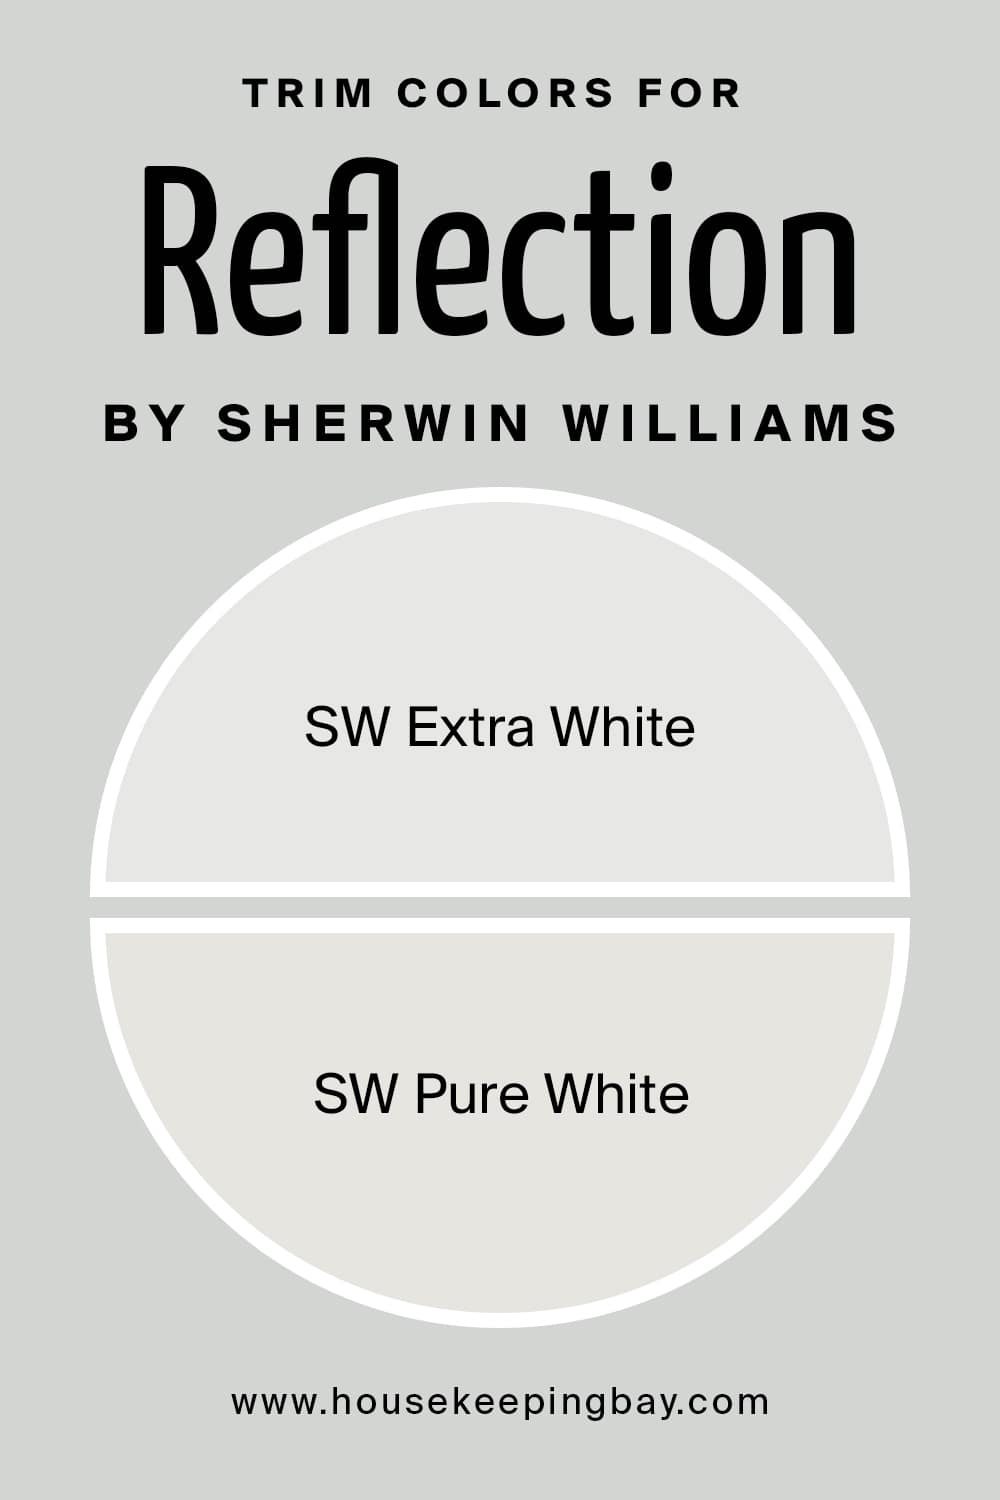 Trim Colors for Reflection by Sherwin Williams